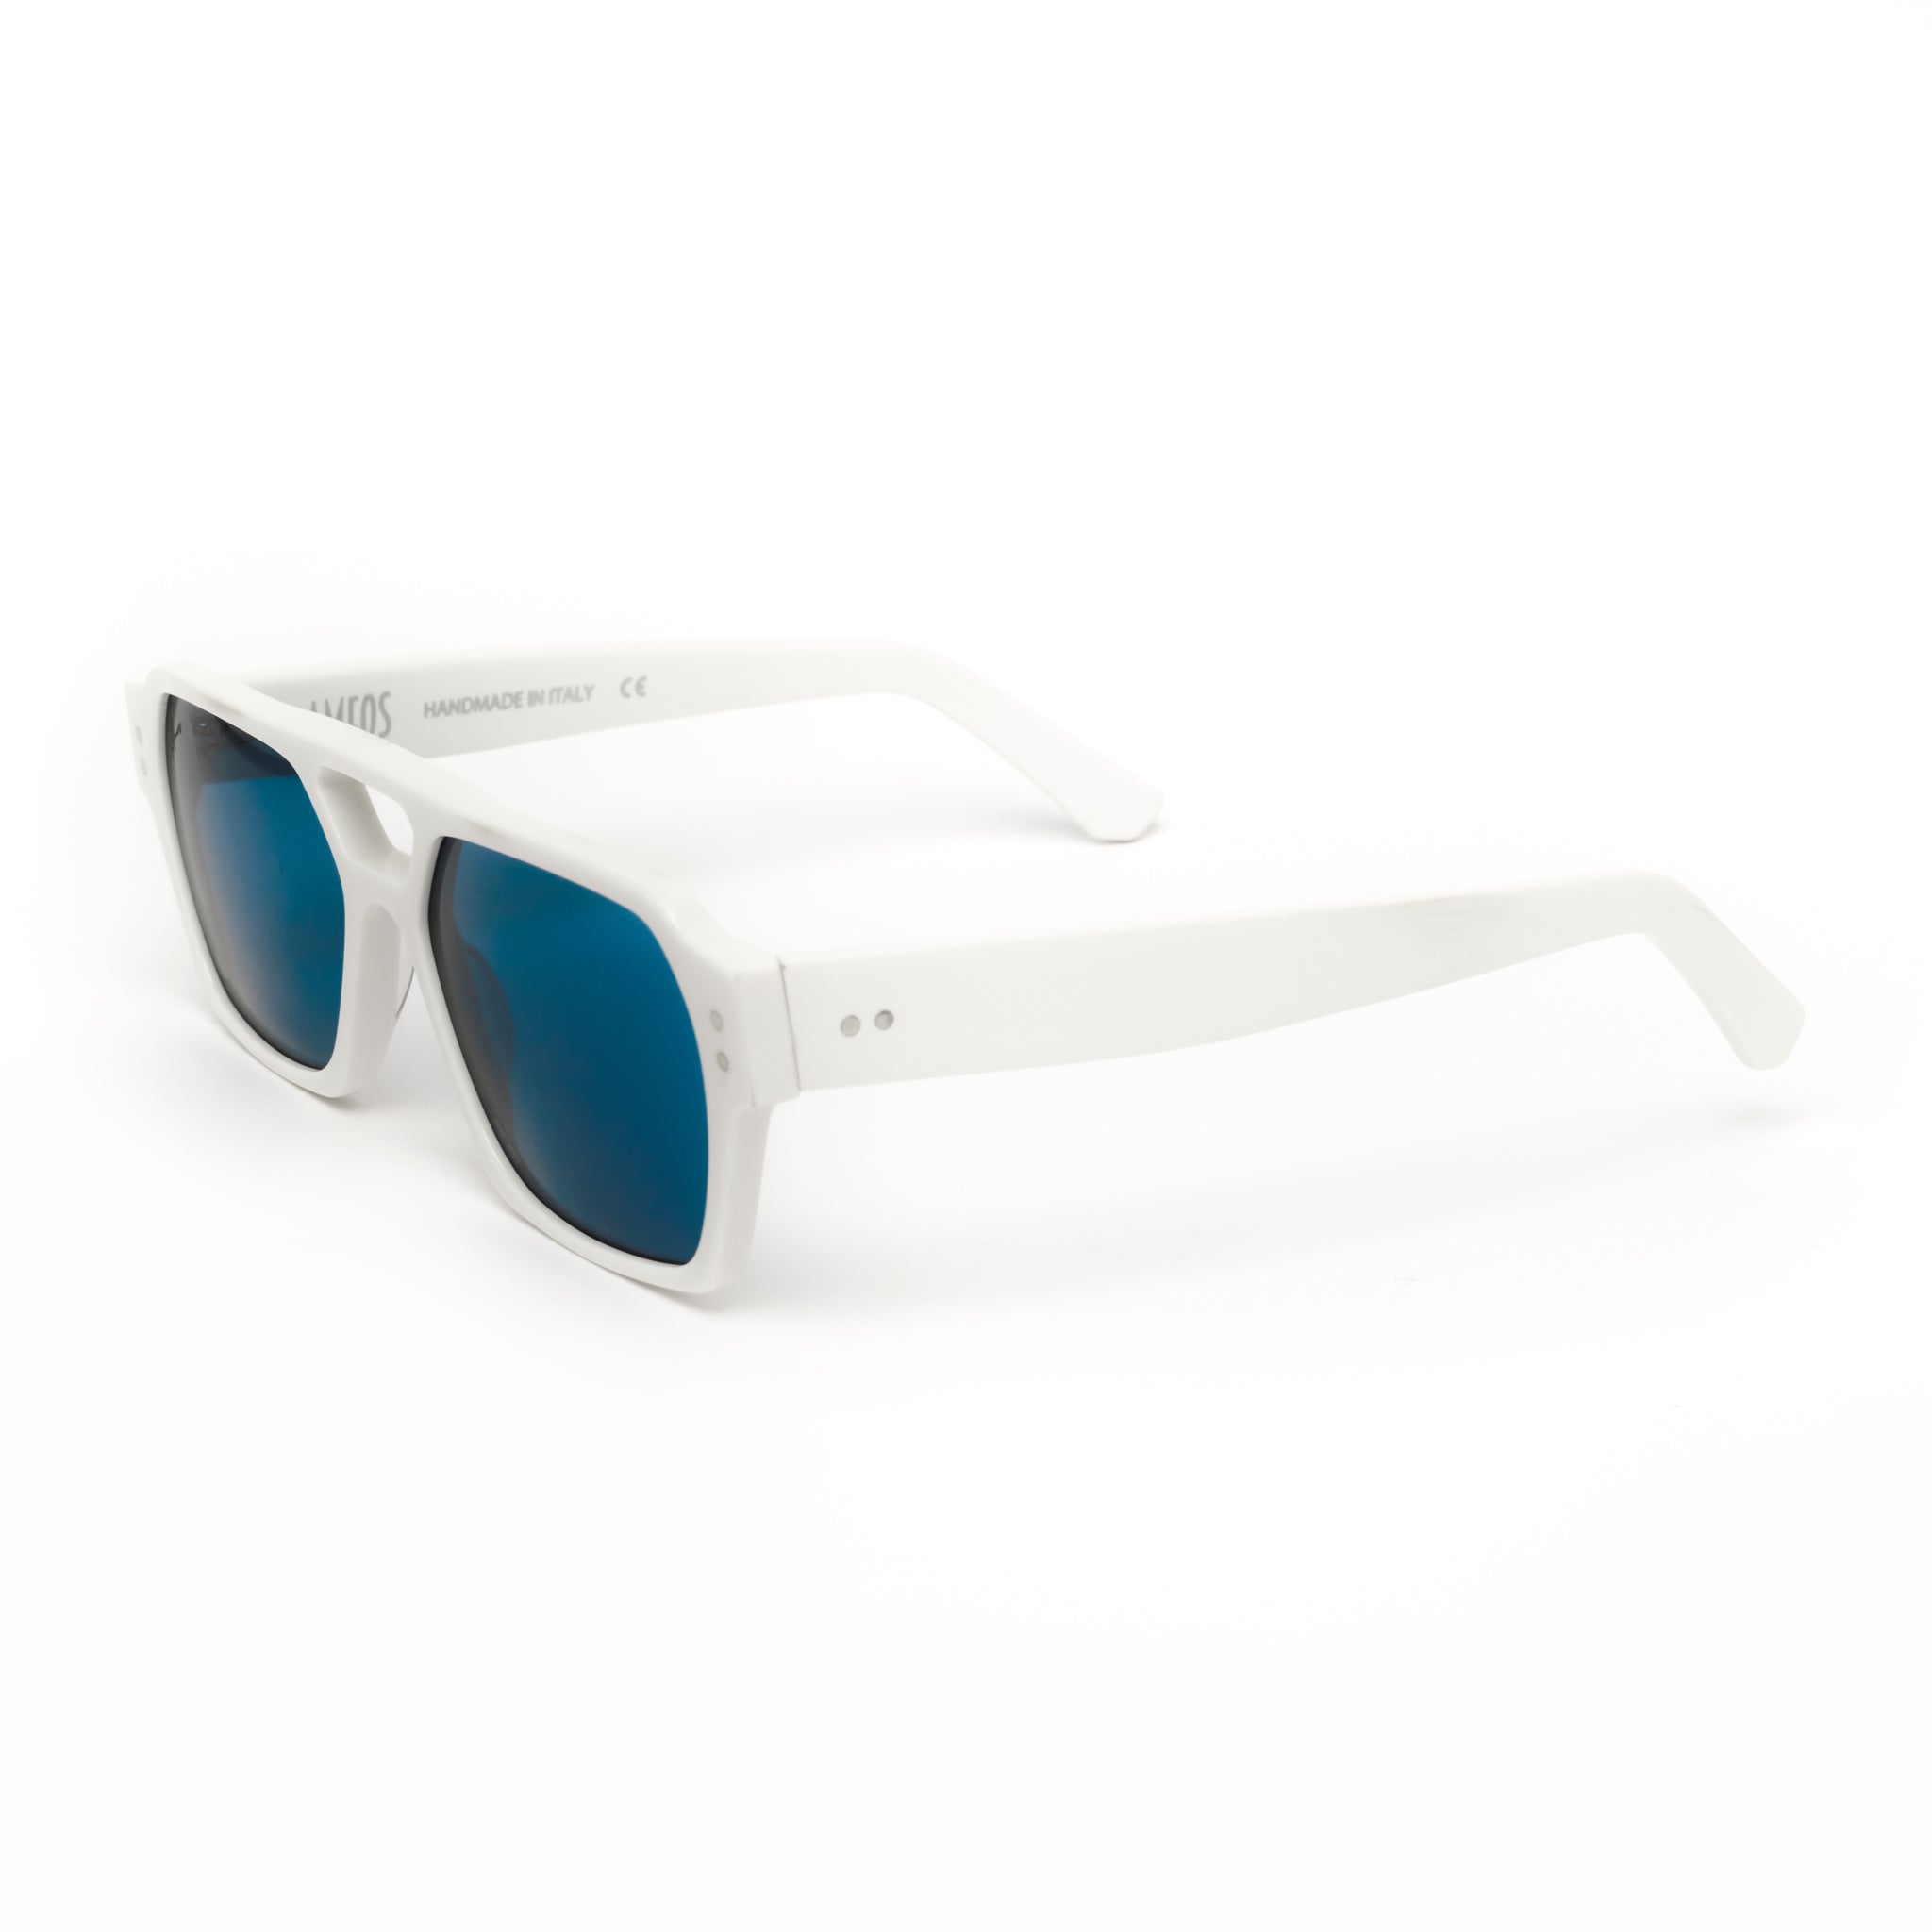 Ameos Identity collection Ego model. White frames with blue lenses. Side view. Genderless, gender neutral eyewear